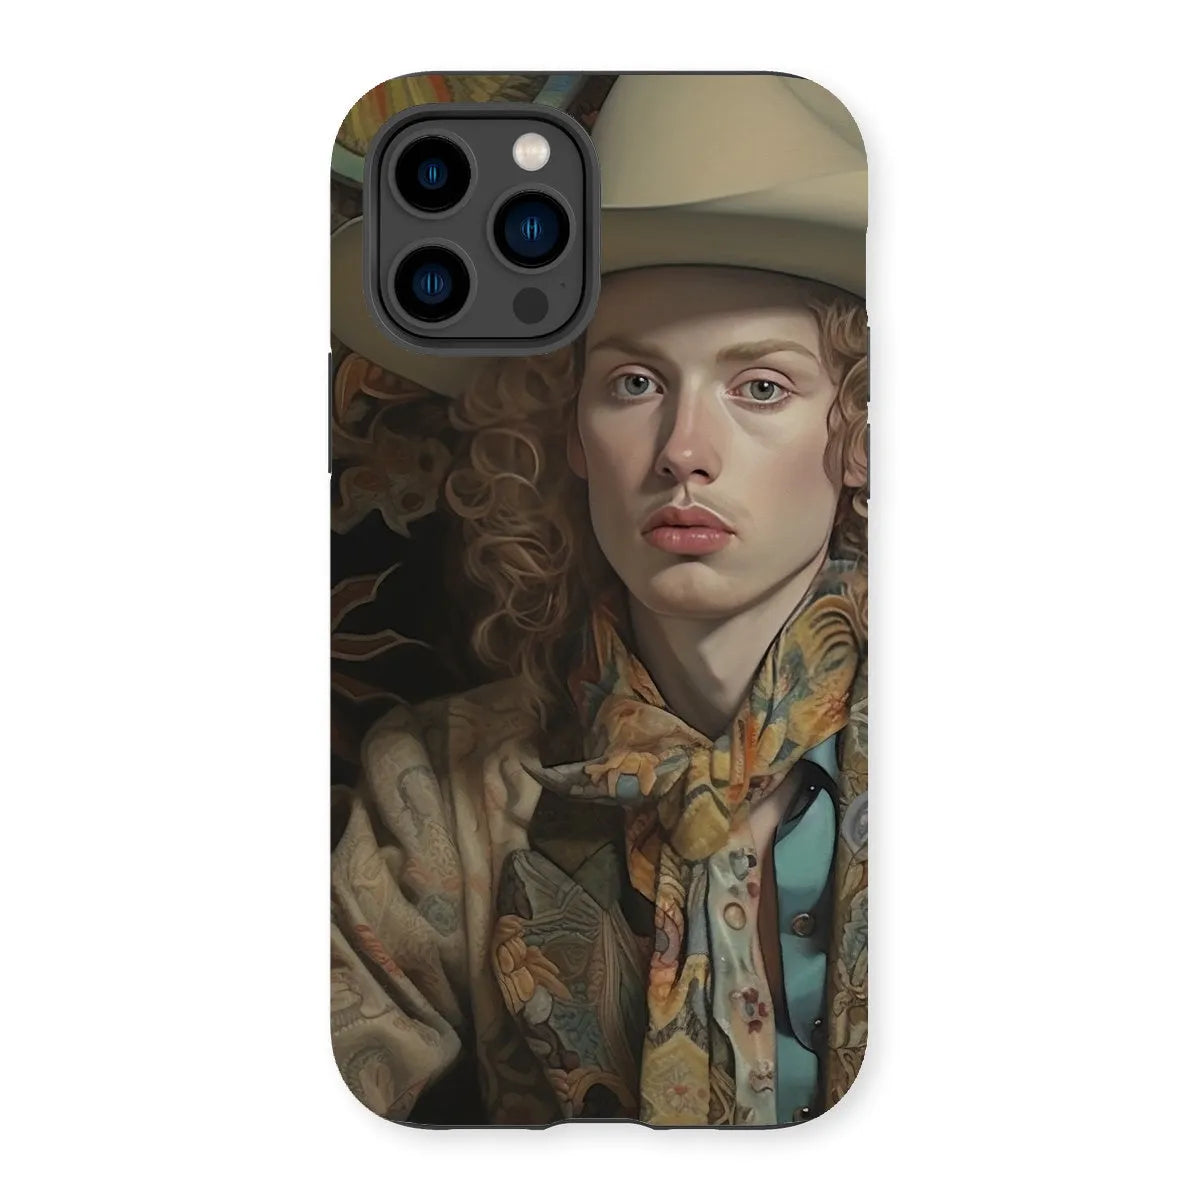 Ollie The Transgender Cowboy - F2m Dandy Outlaw Phone Case - Iphone 14 Pro / Matte - Mobile Phone Cases - Aesthetic Art